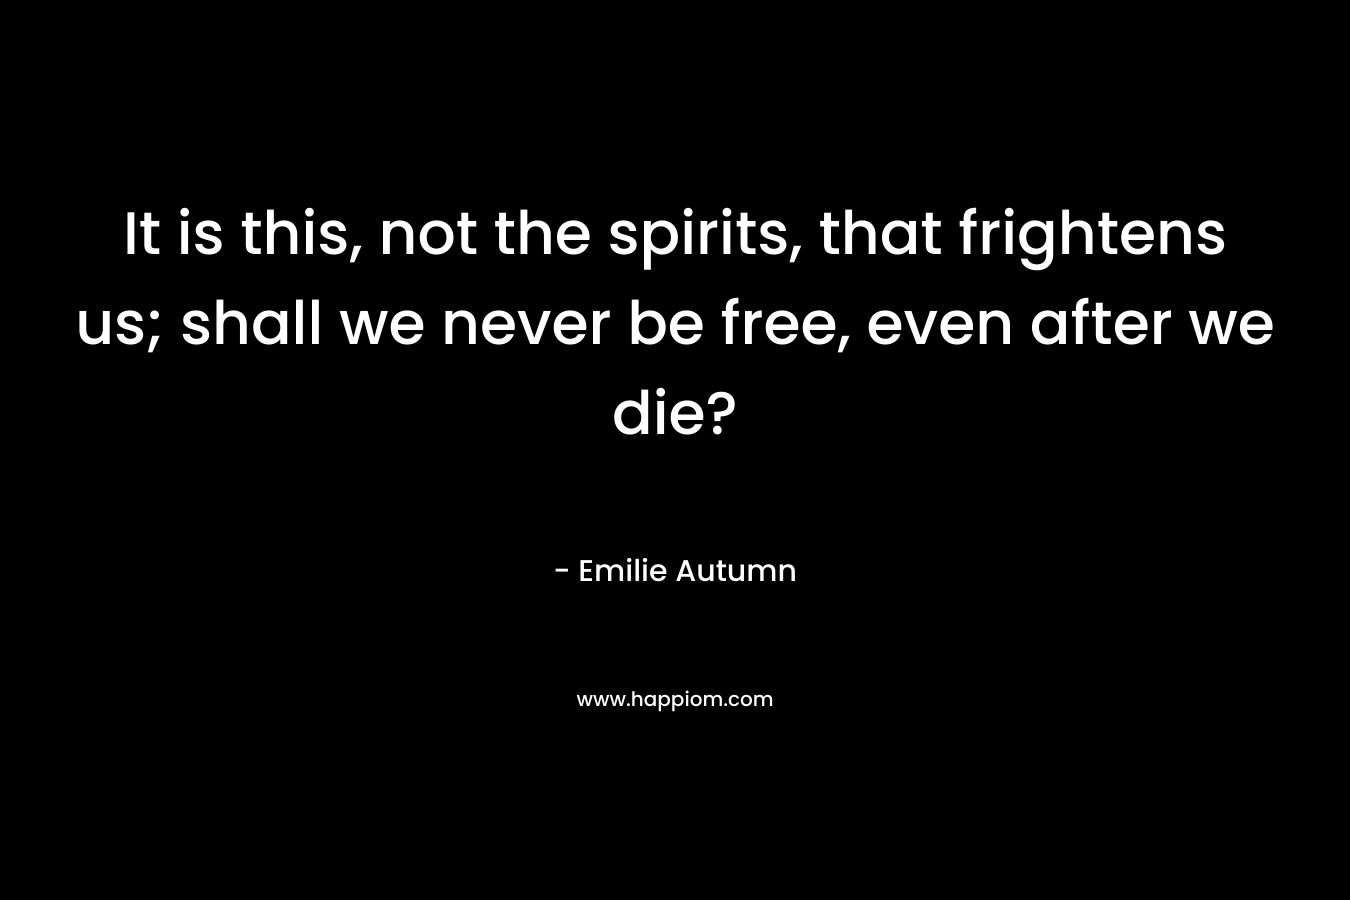 It is this, not the spirits, that frightens us; shall we never be free, even after we die? – Emilie Autumn